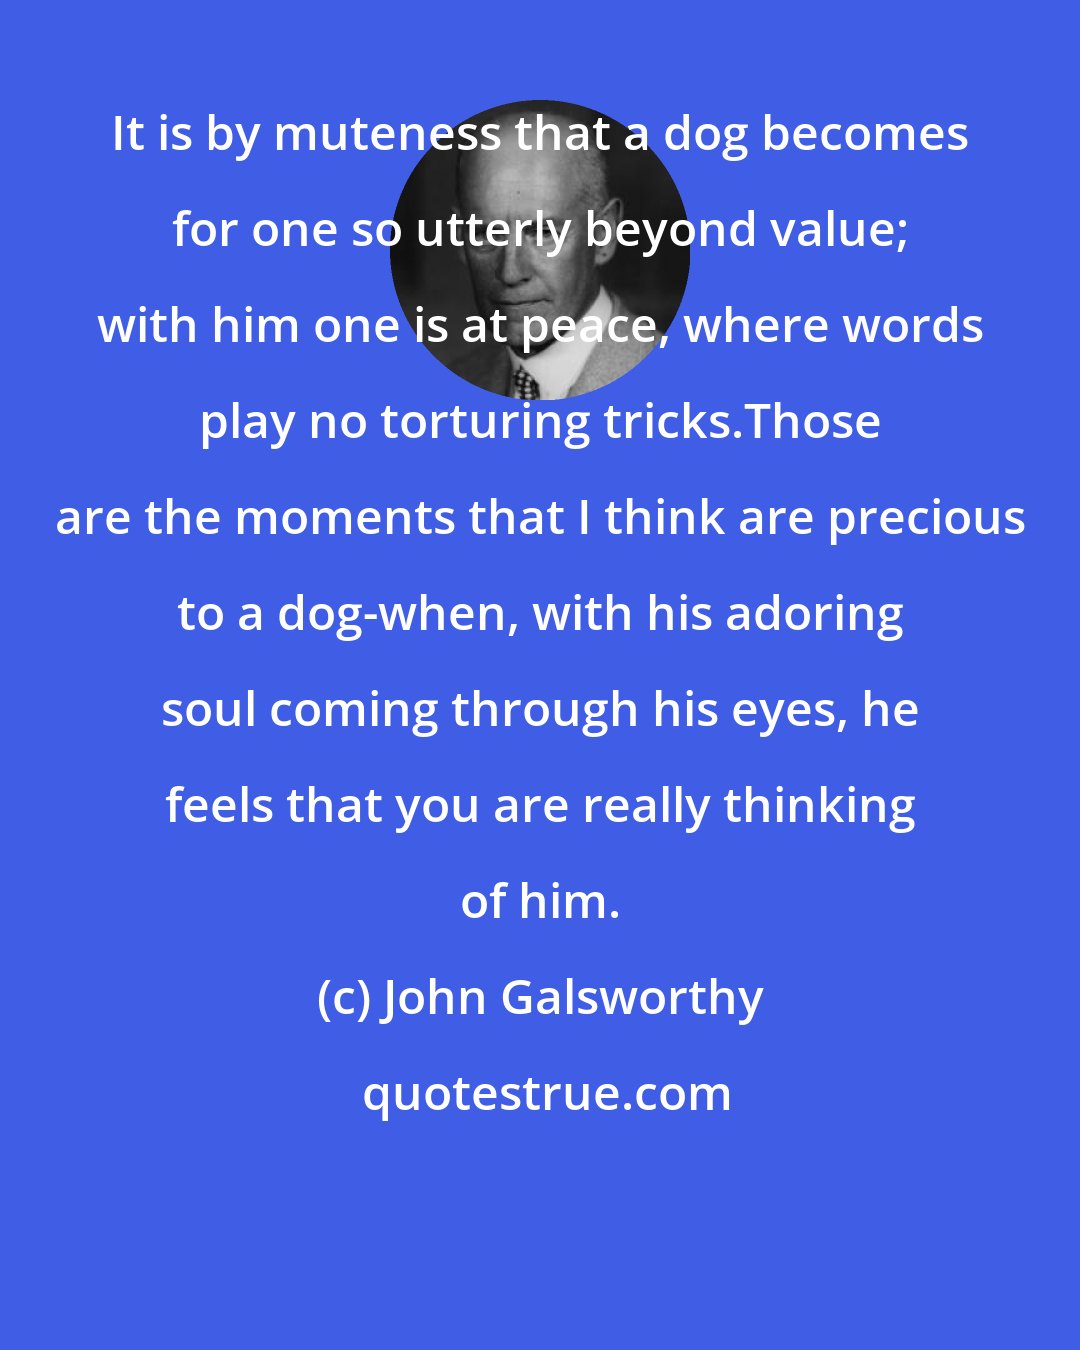 John Galsworthy: It is by muteness that a dog becomes for one so utterly beyond value; with him one is at peace, where words play no torturing tricks.Those are the moments that I think are precious to a dog-when, with his adoring soul coming through his eyes, he feels that you are really thinking of him.